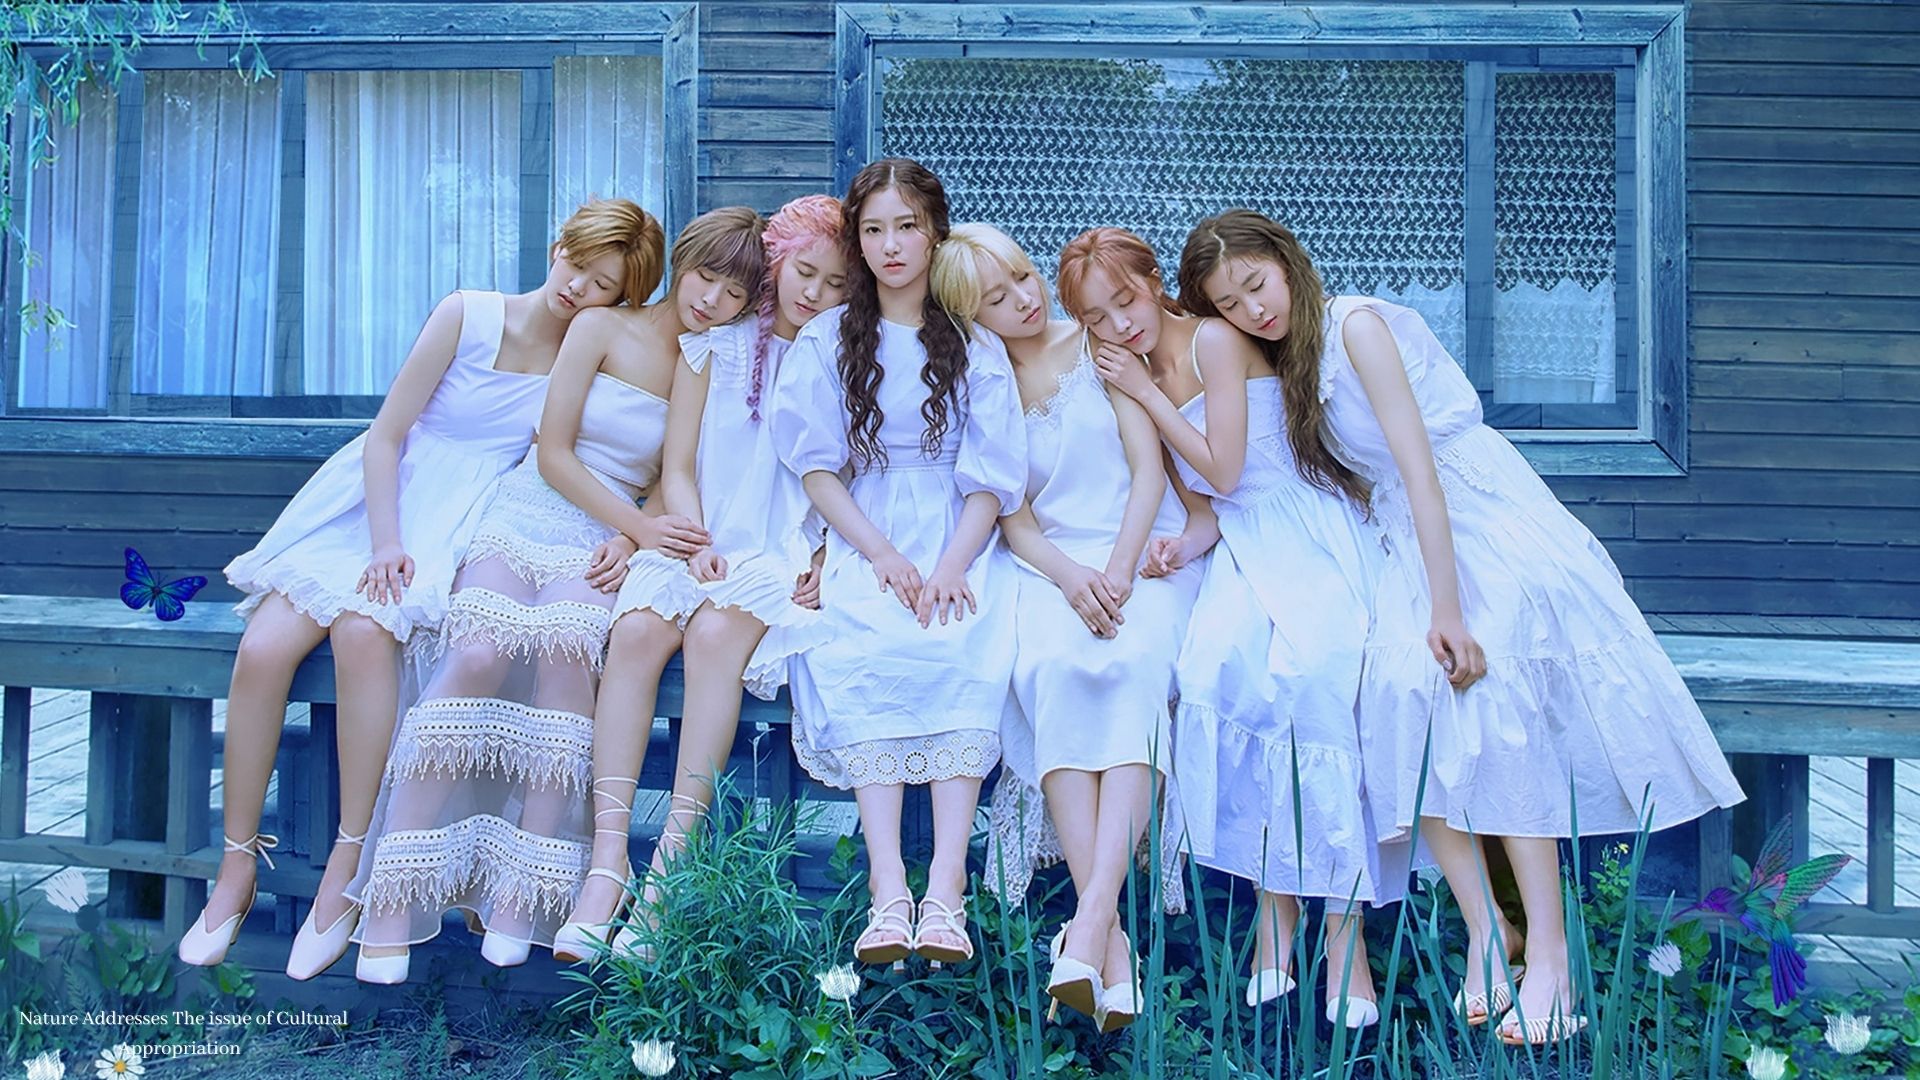 Nature Addresses the Cultural Appropriation Controversy – Stirred With Their Comeback Teasers